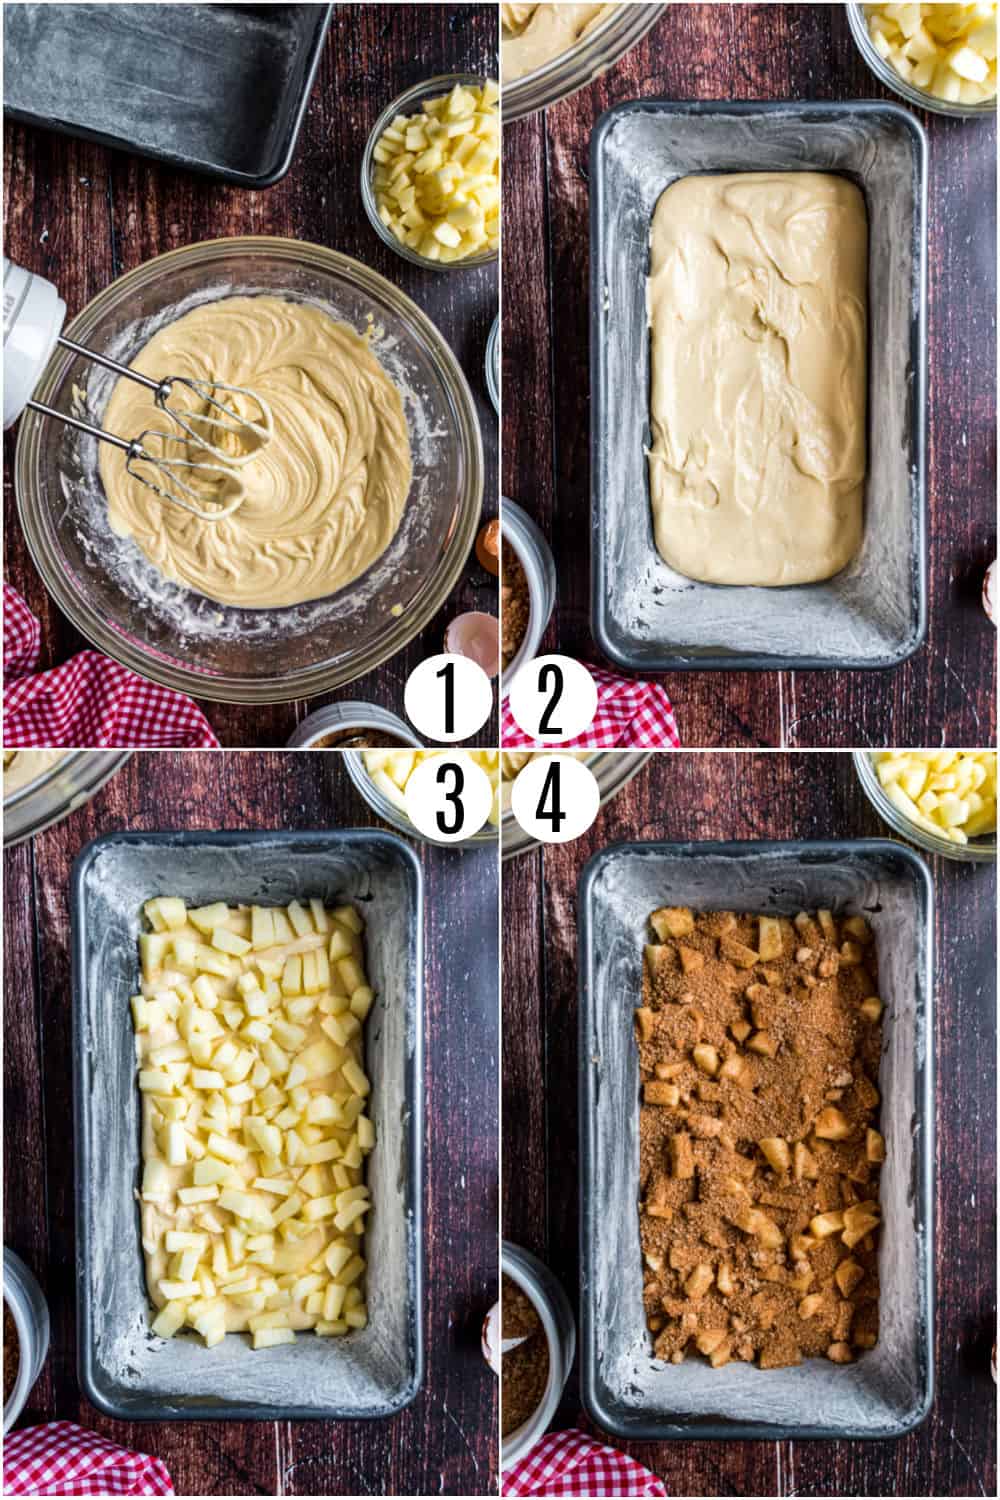 Step by step photos showing how to make apple cinnamon bread.